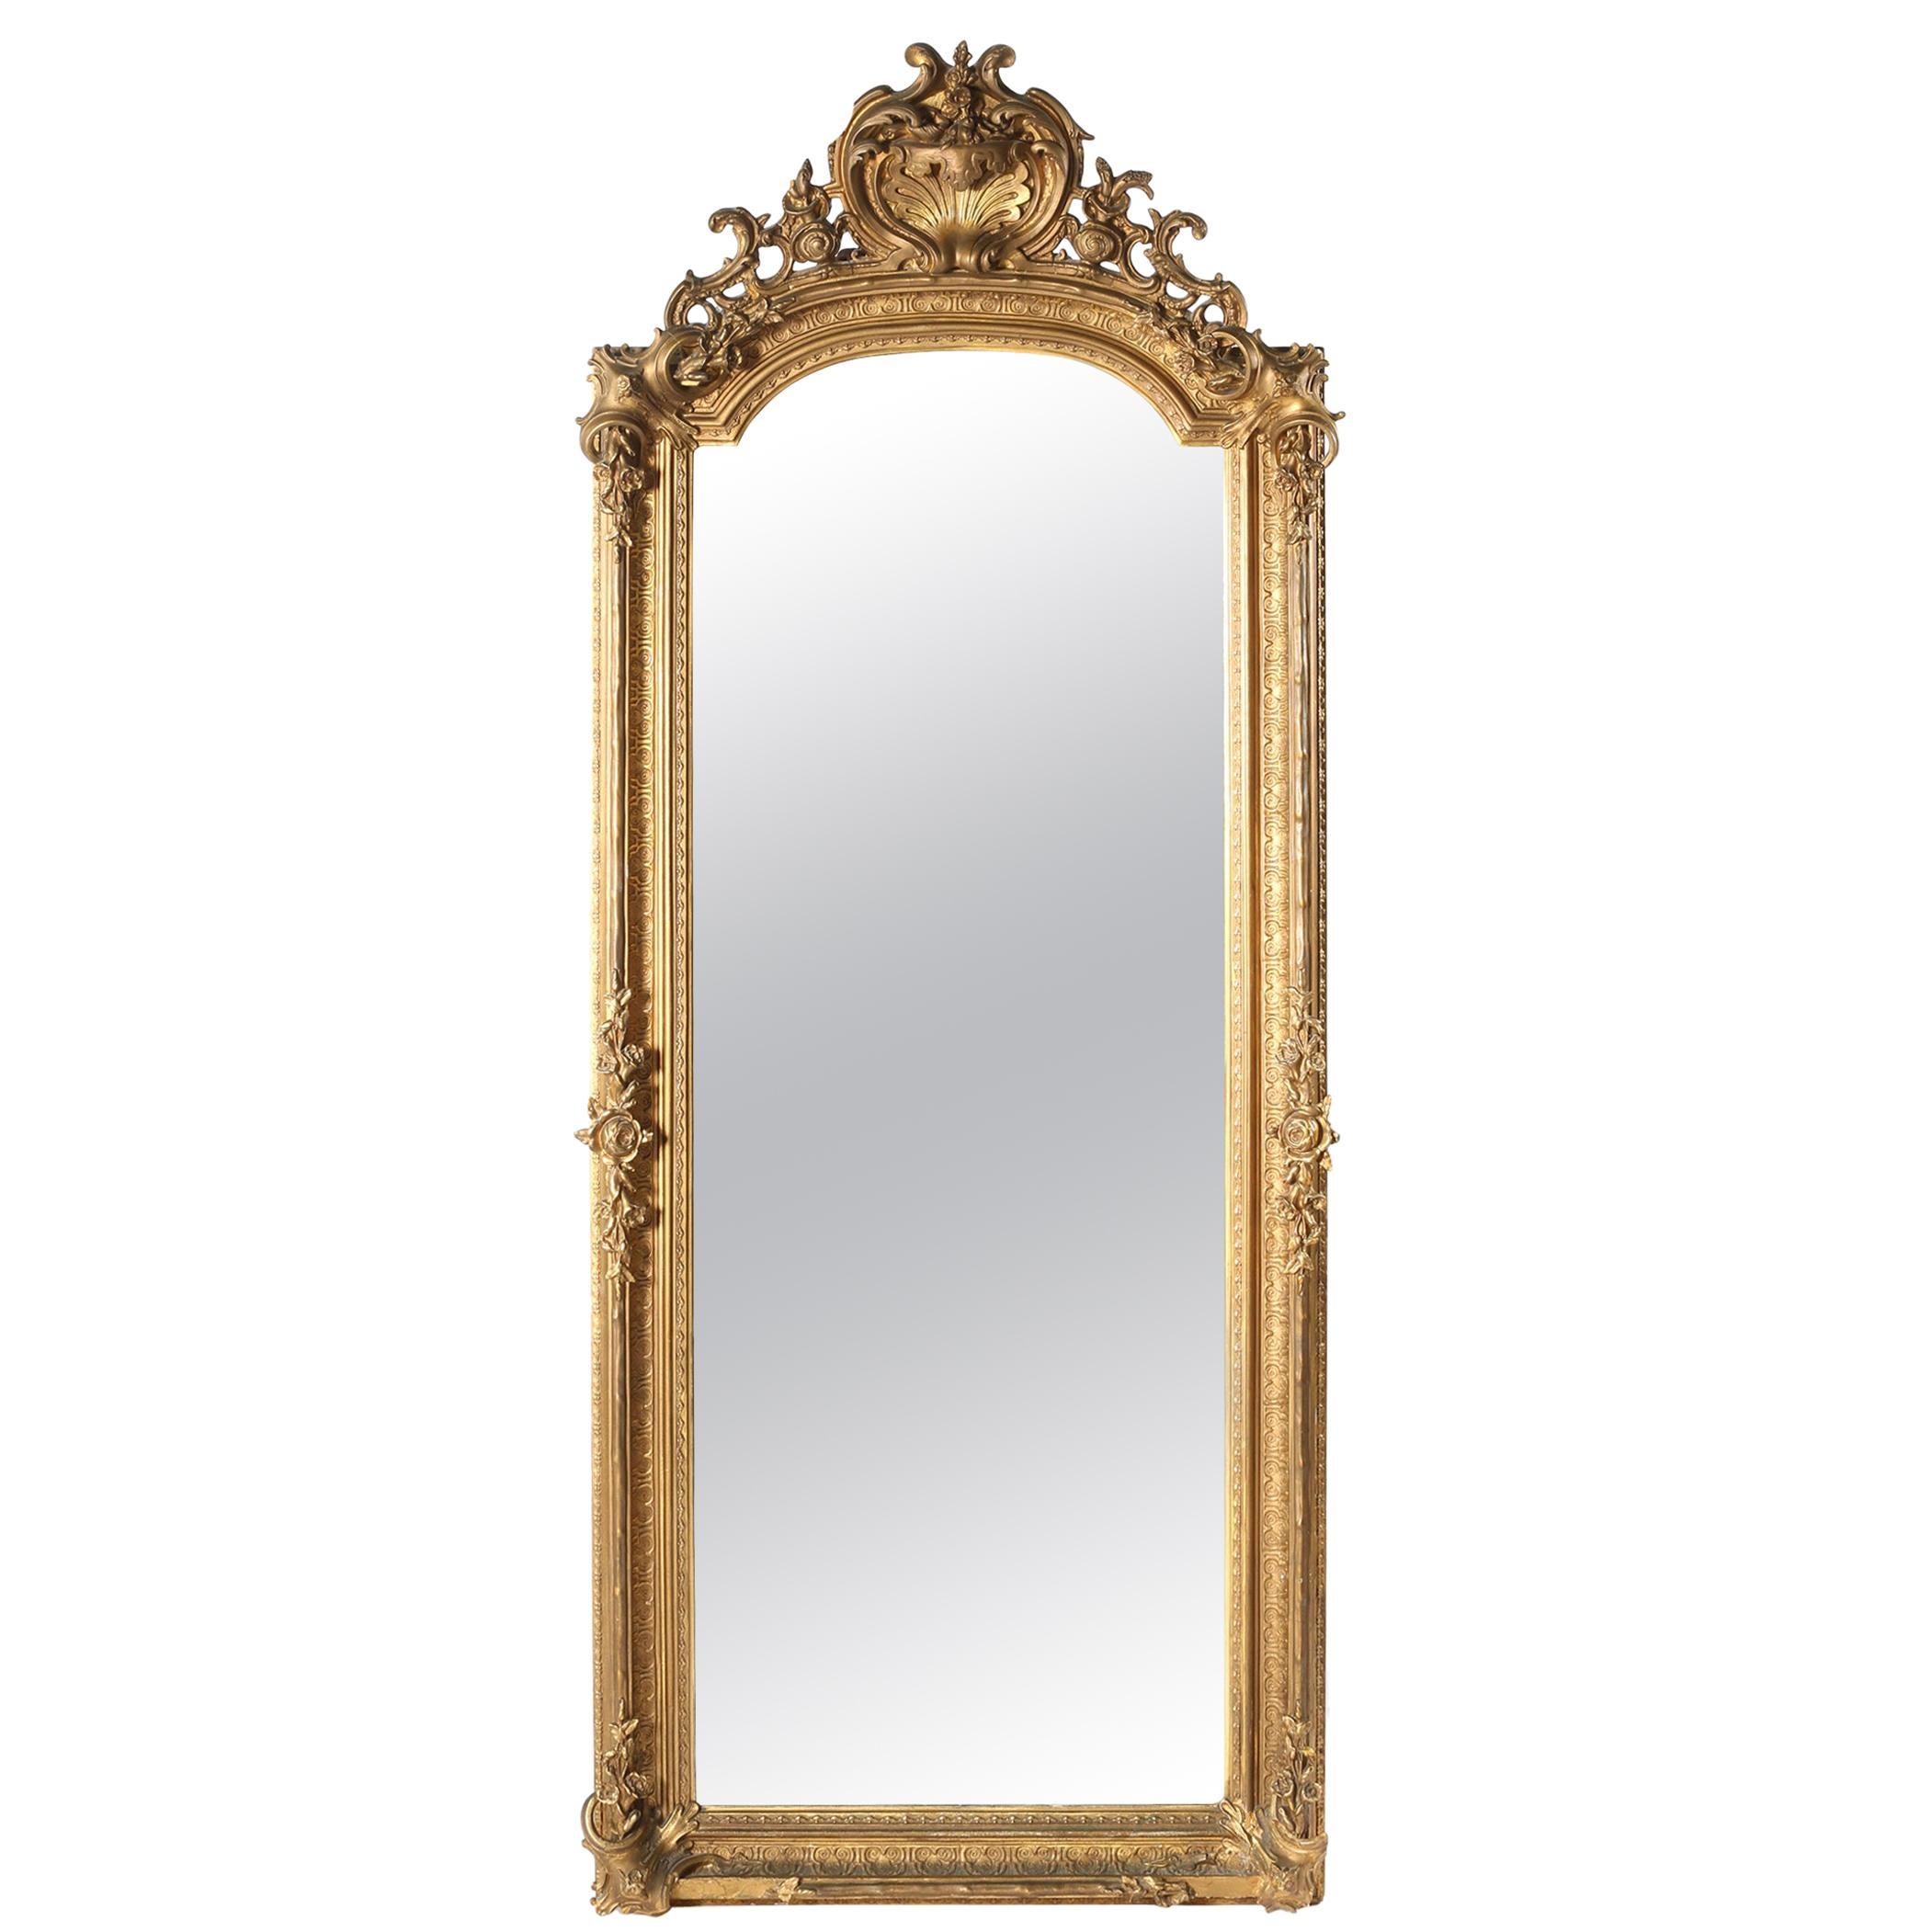 19th Century Giltwood Framed Hanging Wall Mirror